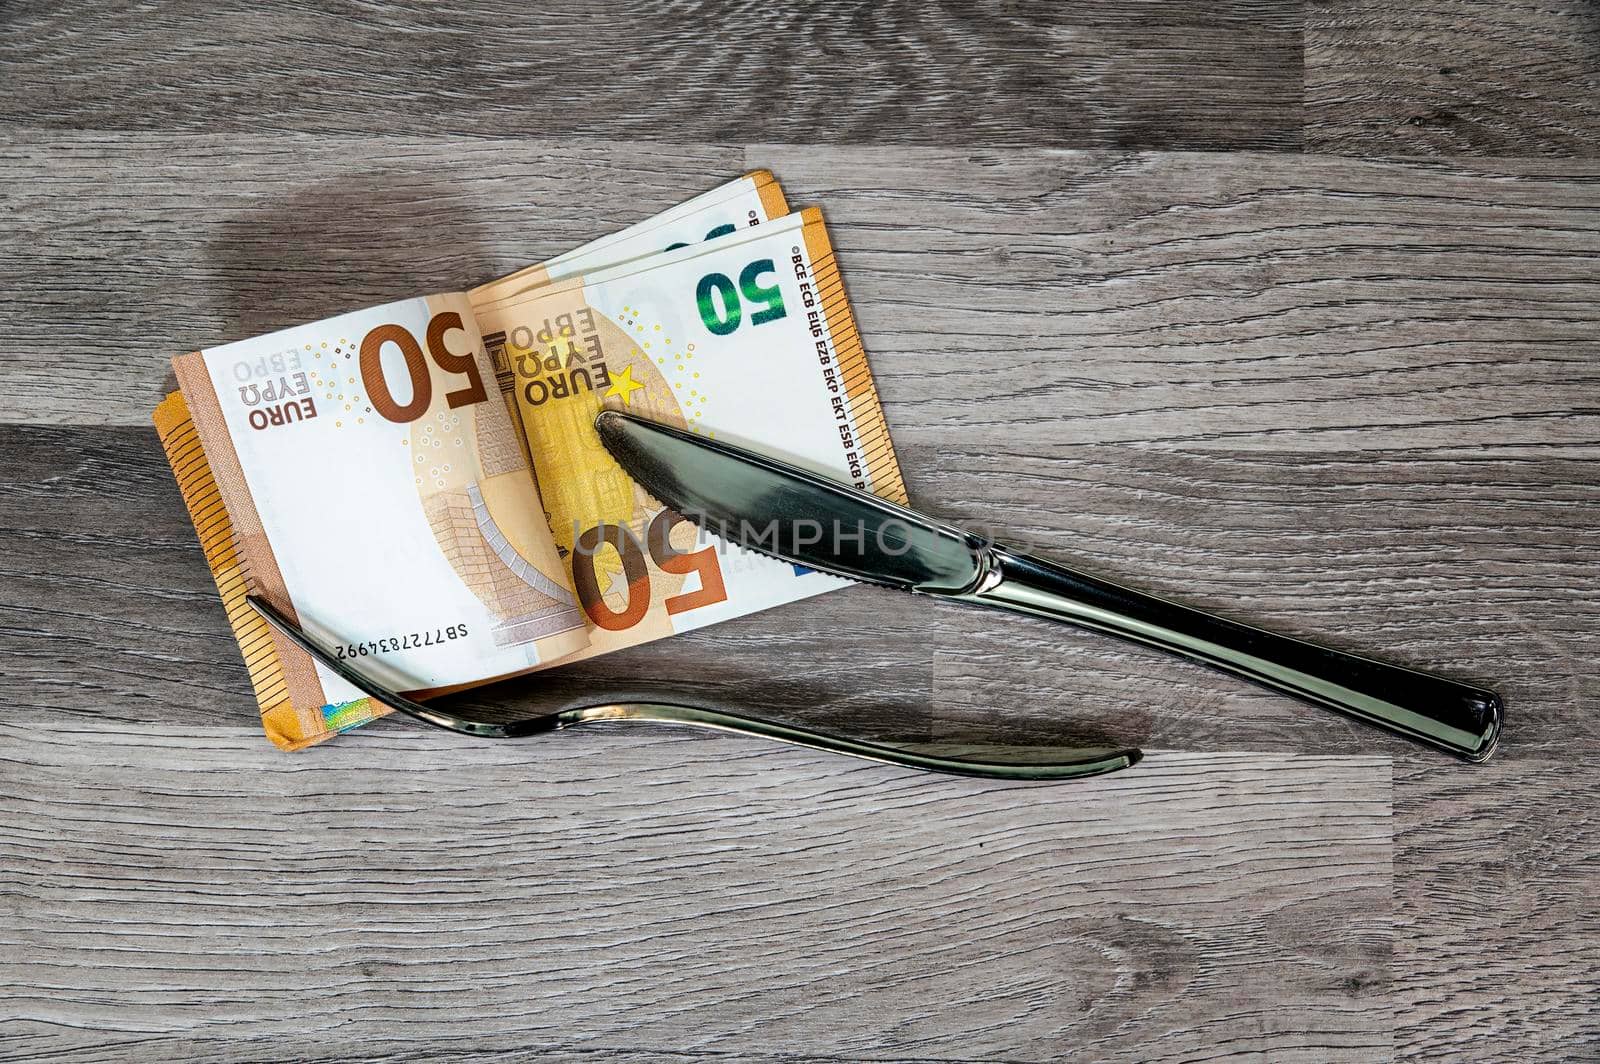 50 euro banknotes with fork and knife by carfedeph